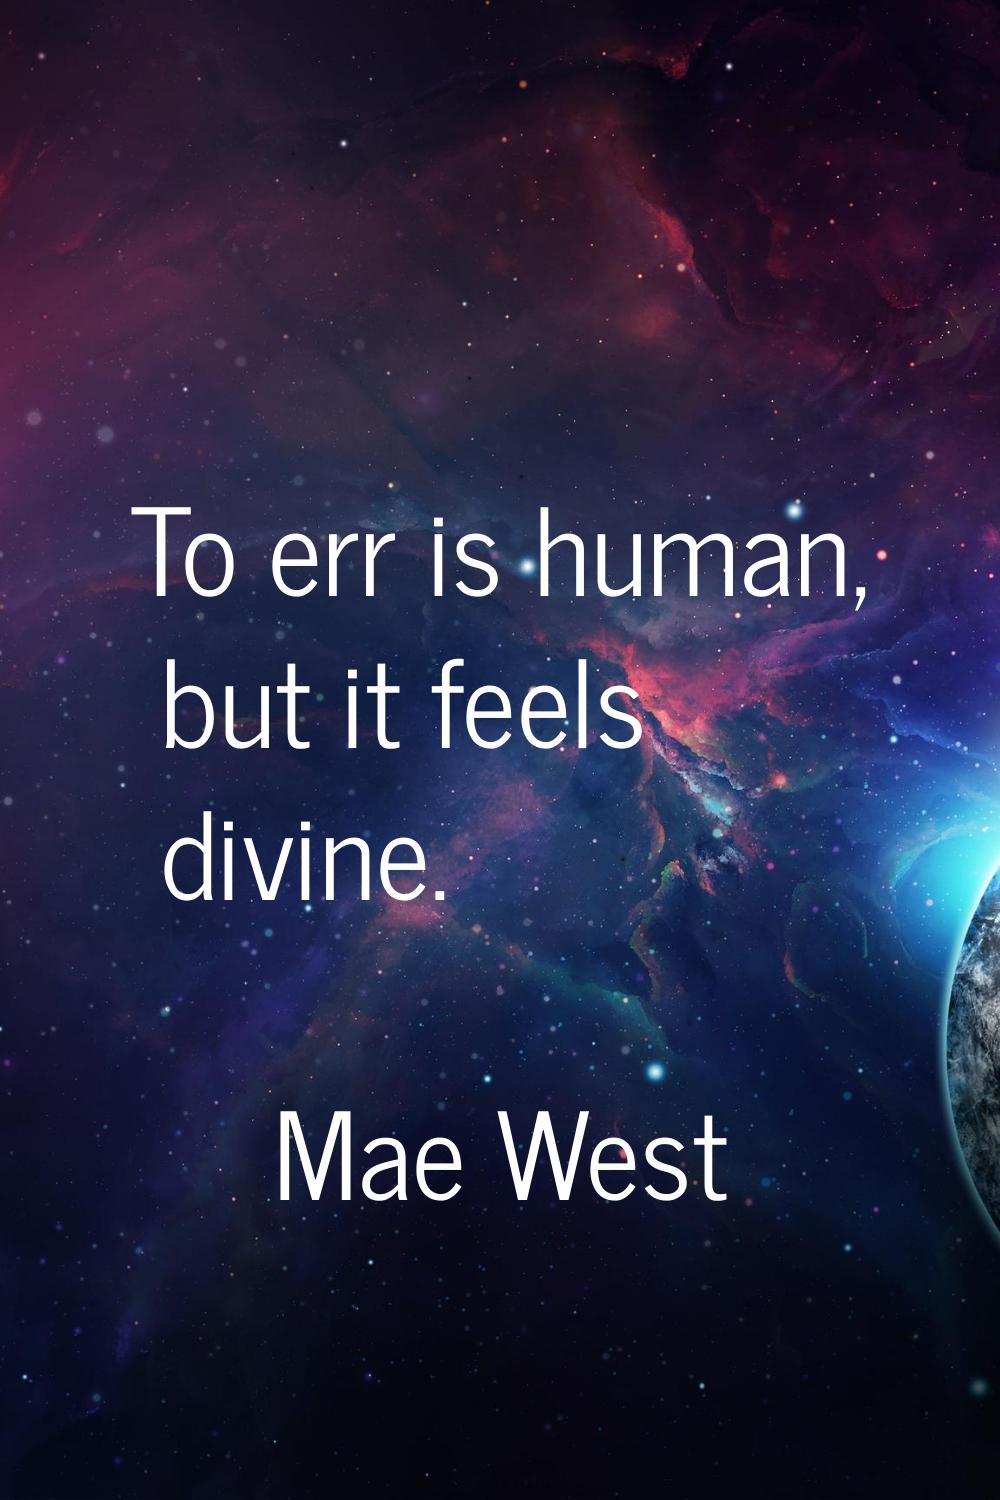 To err is human, but it feels divine.